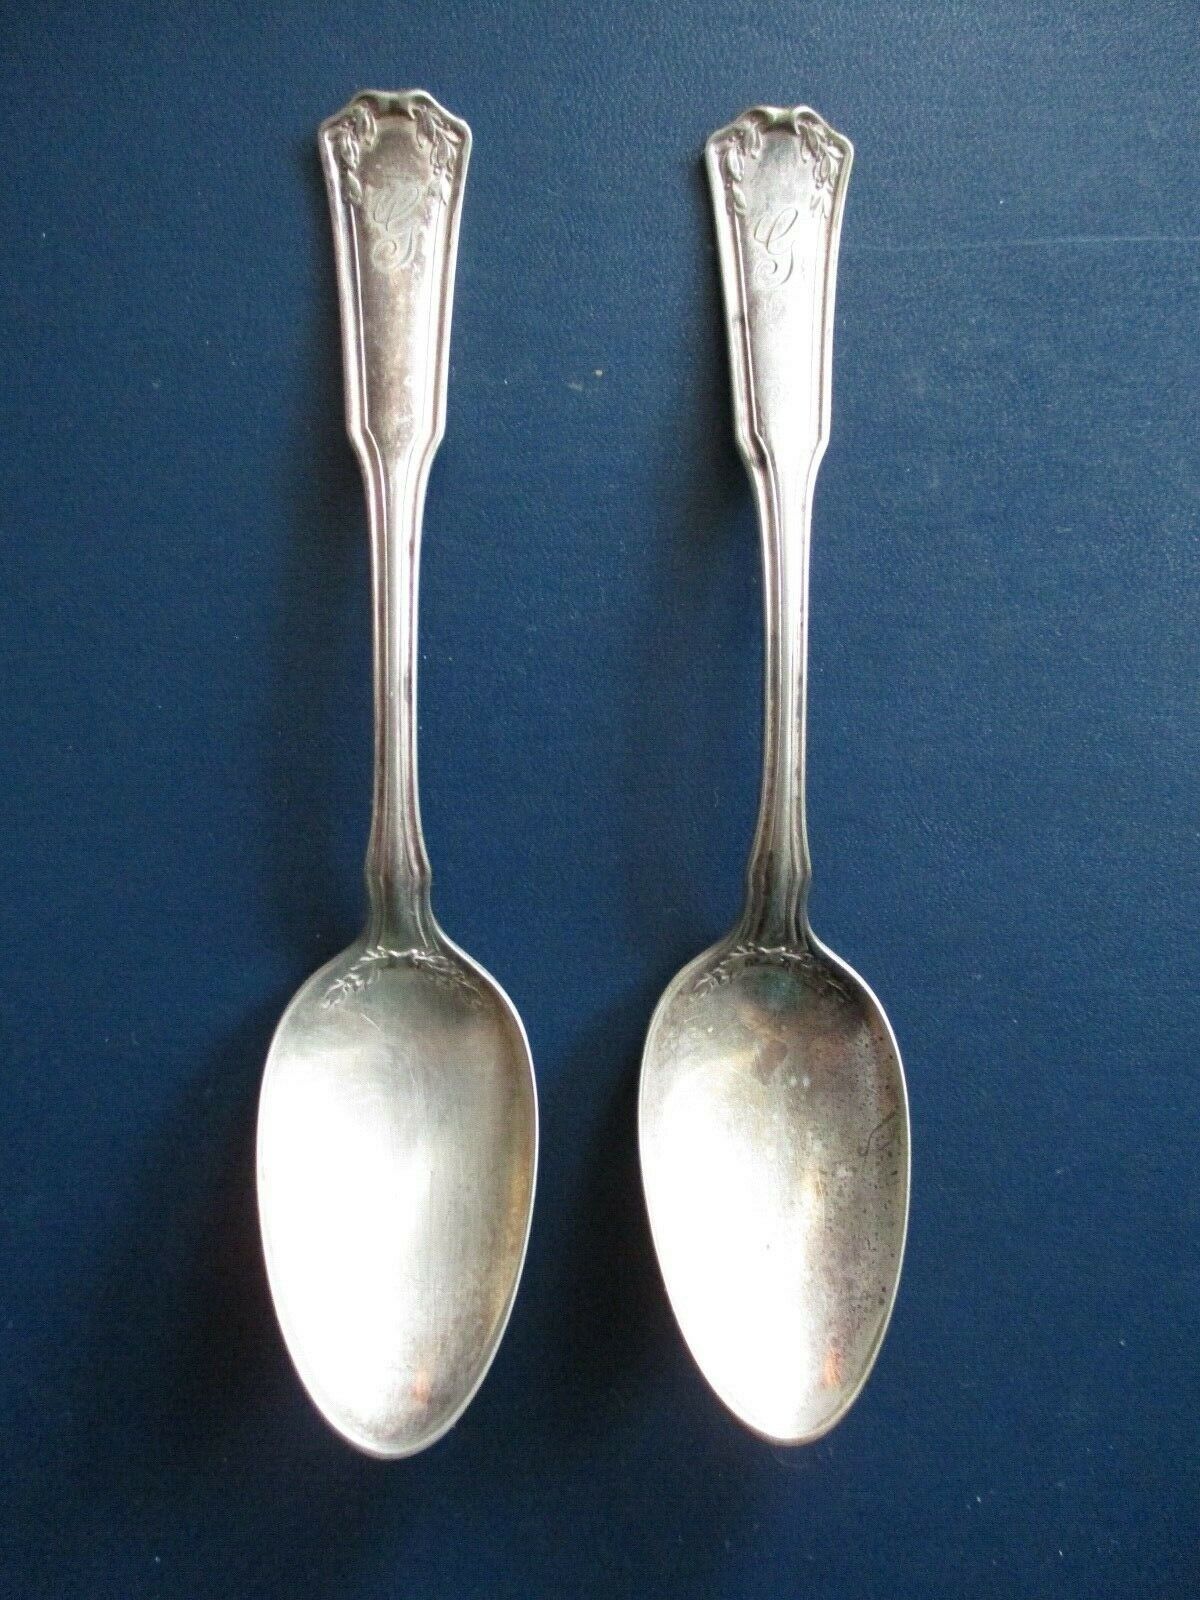 2 Vintage 1835 R Wallace Silverplate Extra and 50 similar items